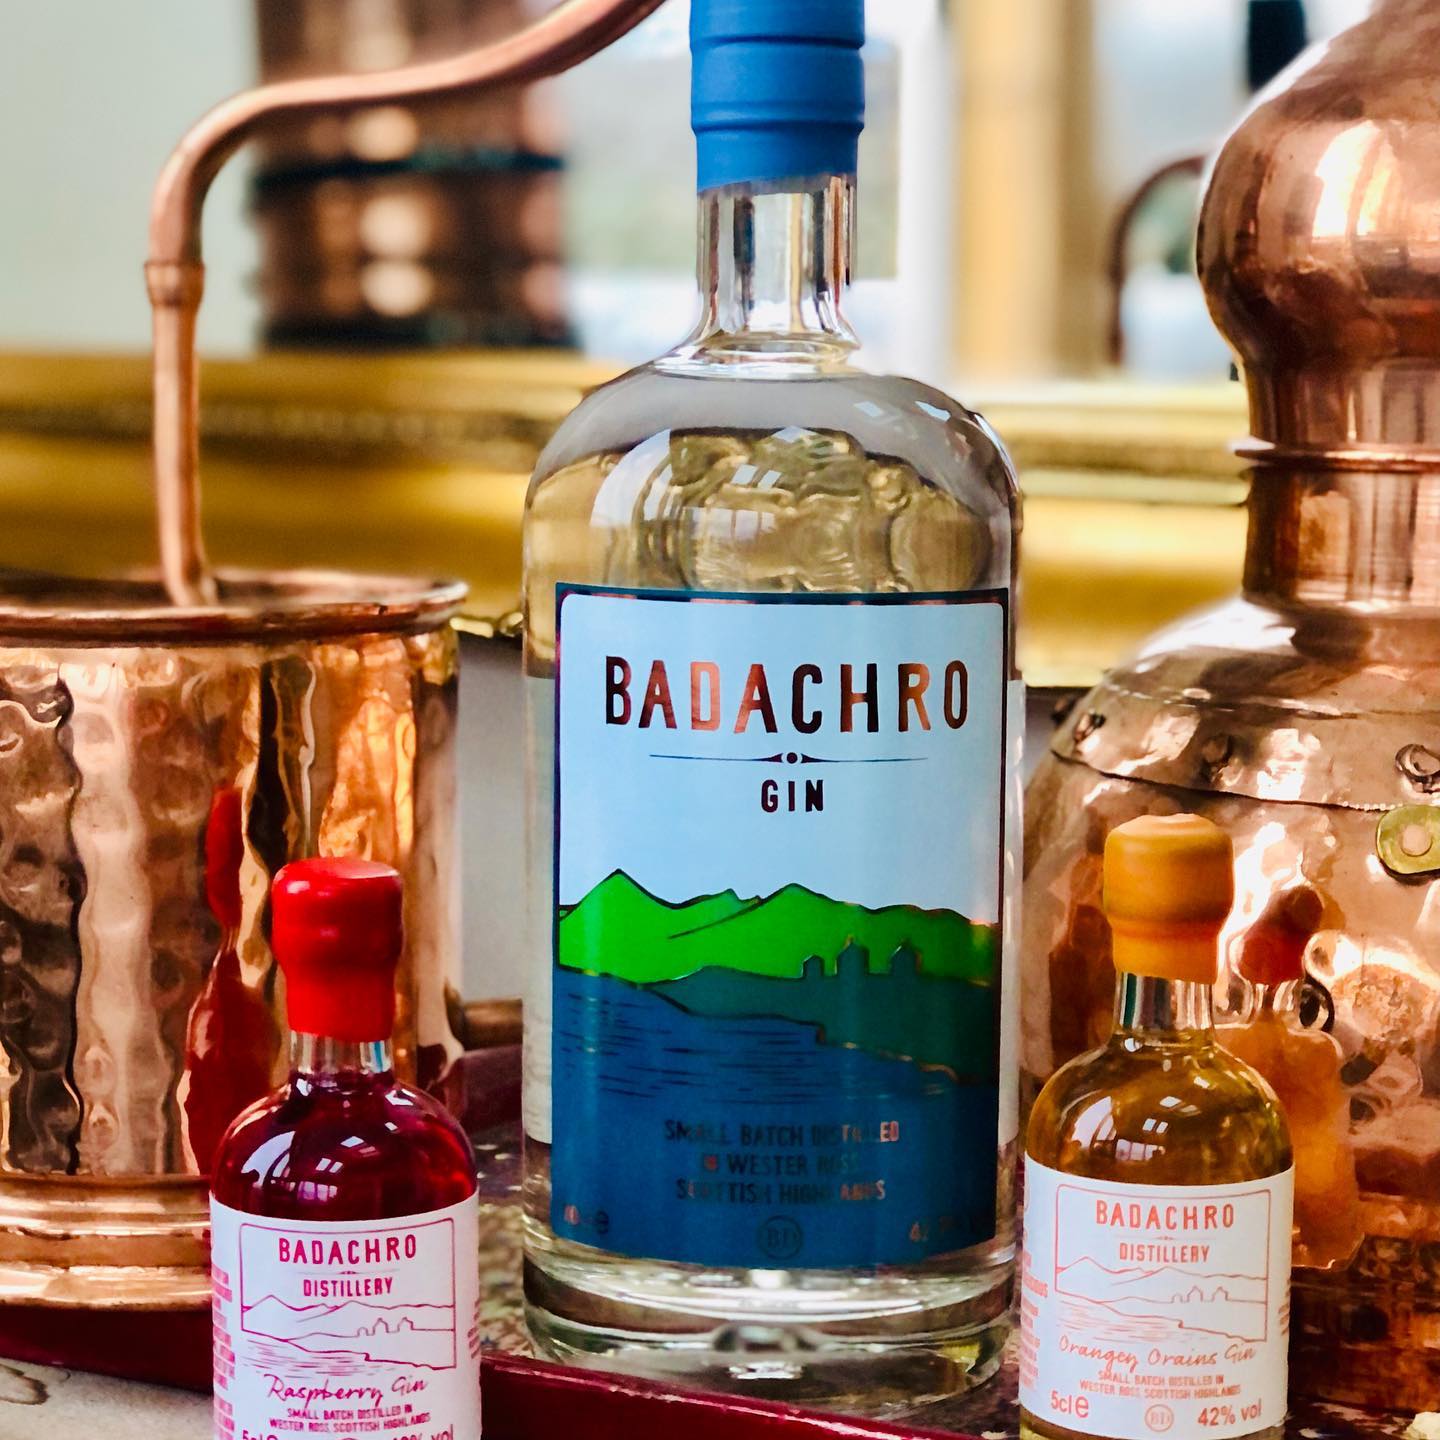 A glimpse of diverse products by Badachro Distillery, supporting the UK economy on YouK.